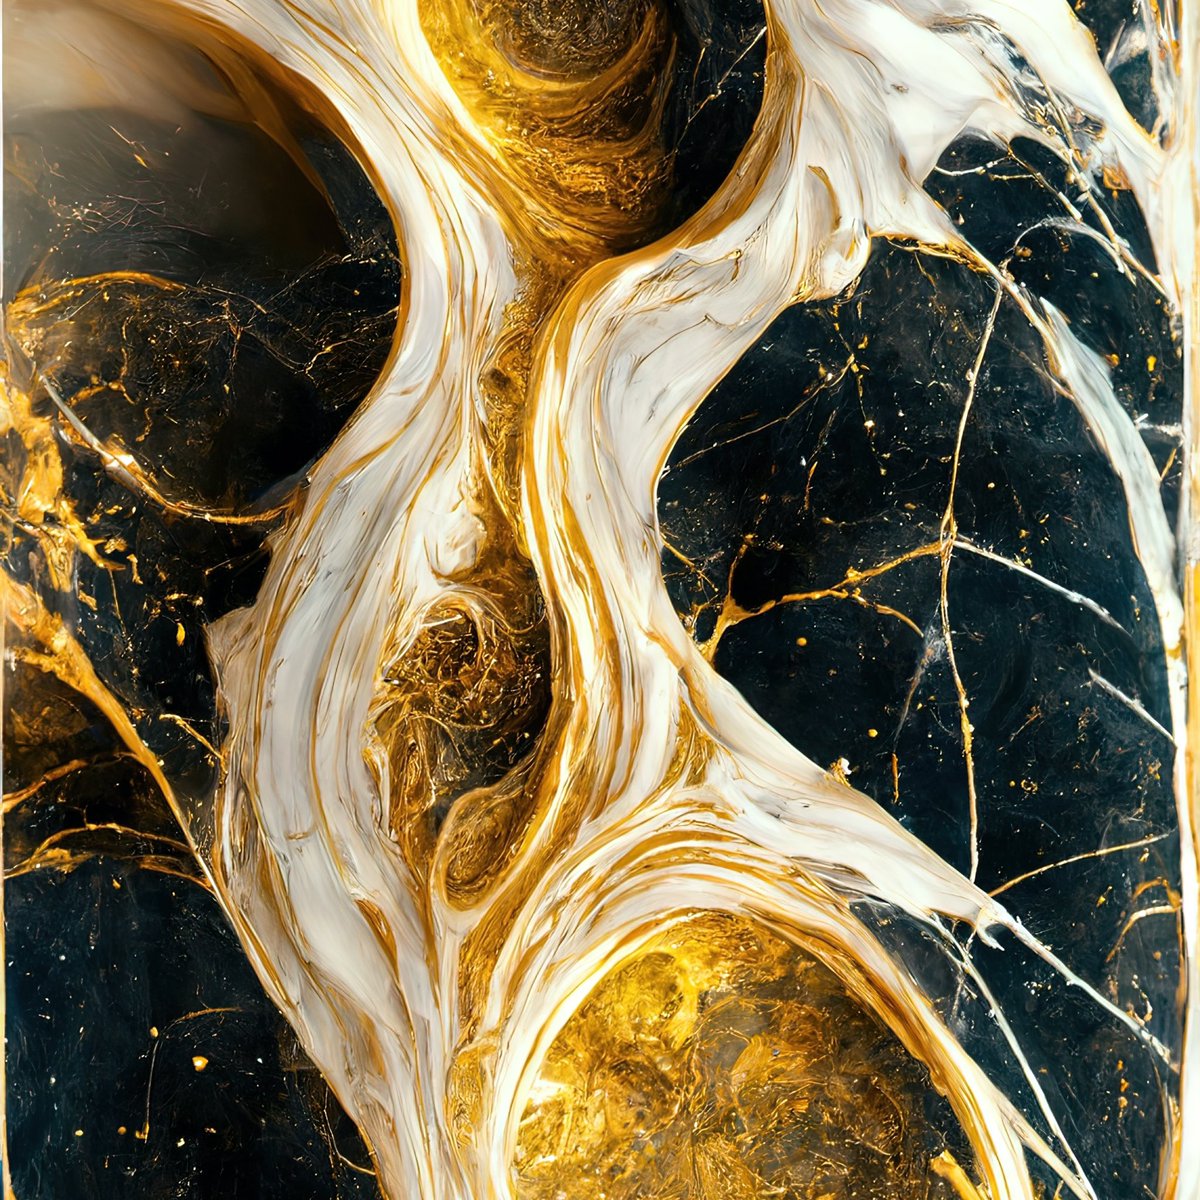 Look for bright and unique wallpapers in the Abstract category🔥

#papeisdeparede #papeisdeparedetumblr #wallpaperhd #wallpaperiphone #wallpaperandroid #abstract #ai #abstractbackground